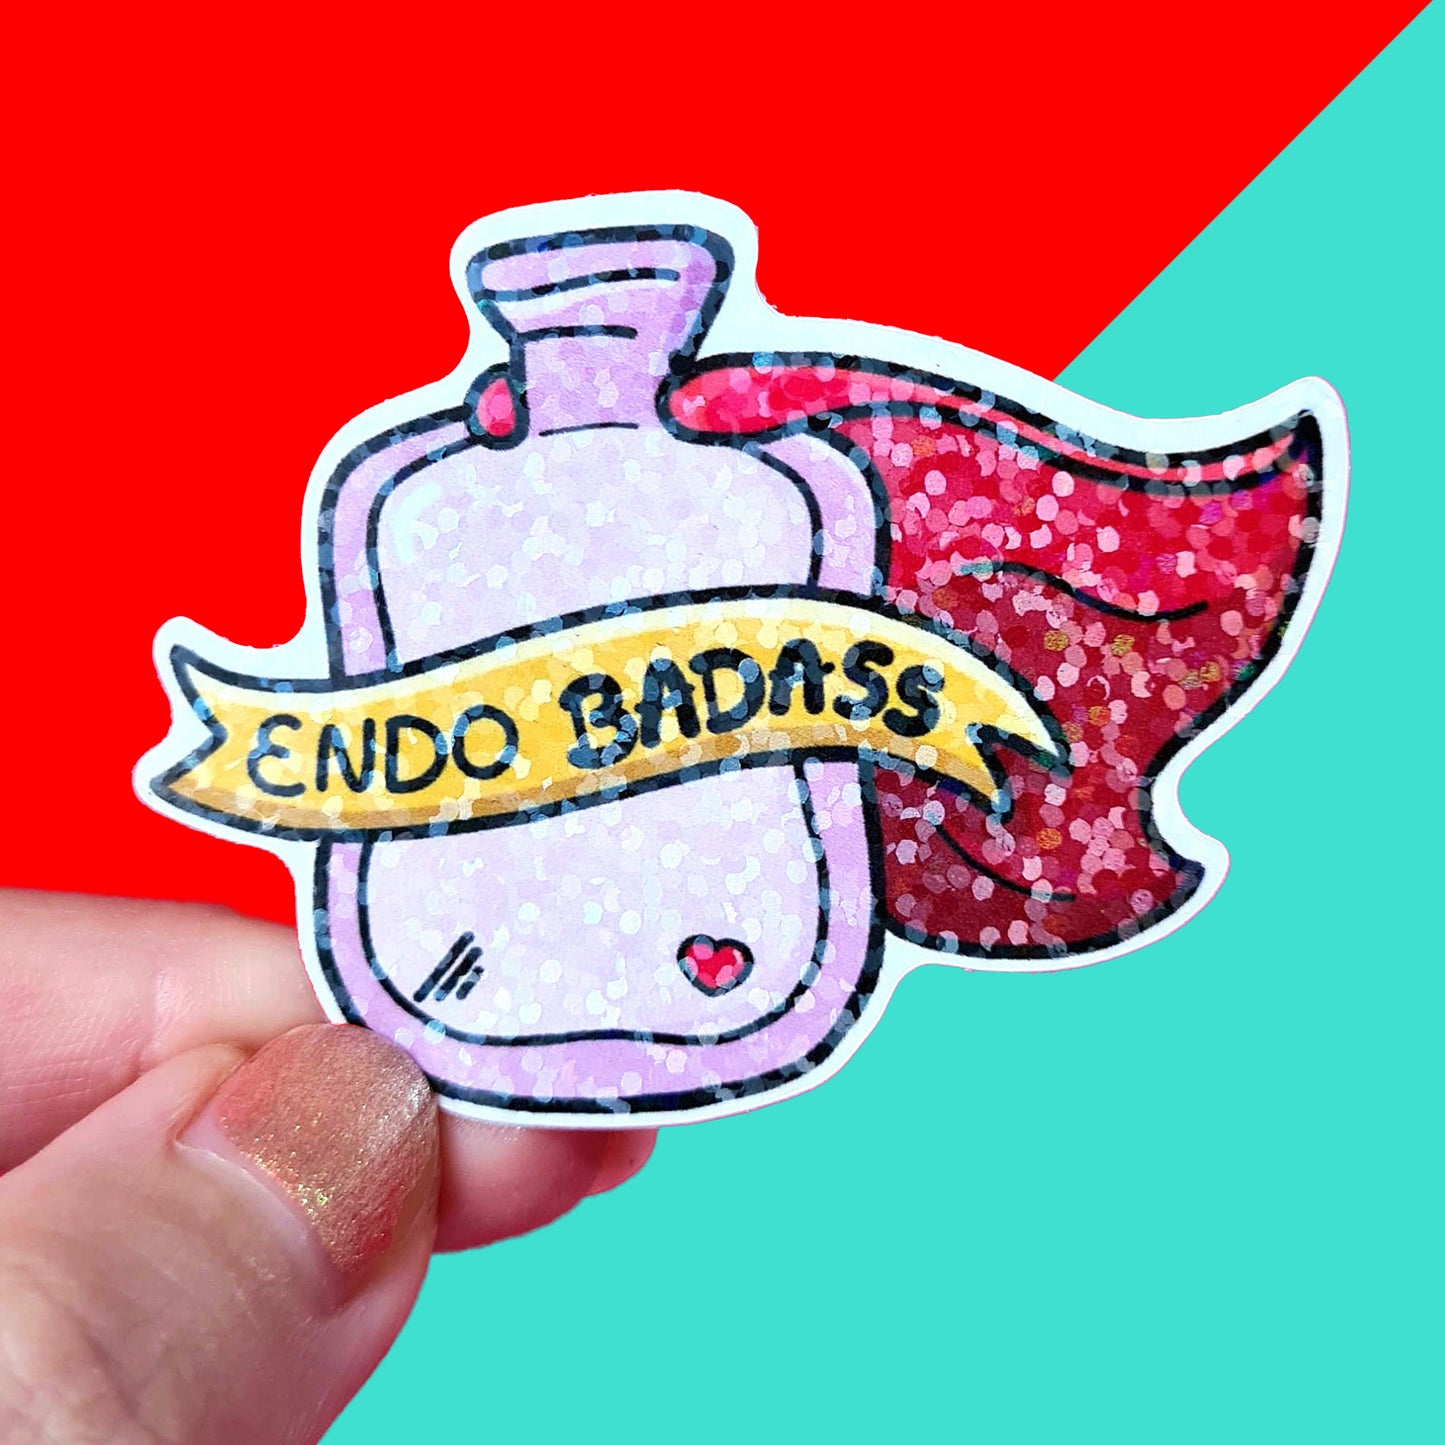 glittery Endo bass stickers. It features a hot water bottle with a cape and says Endo Badass